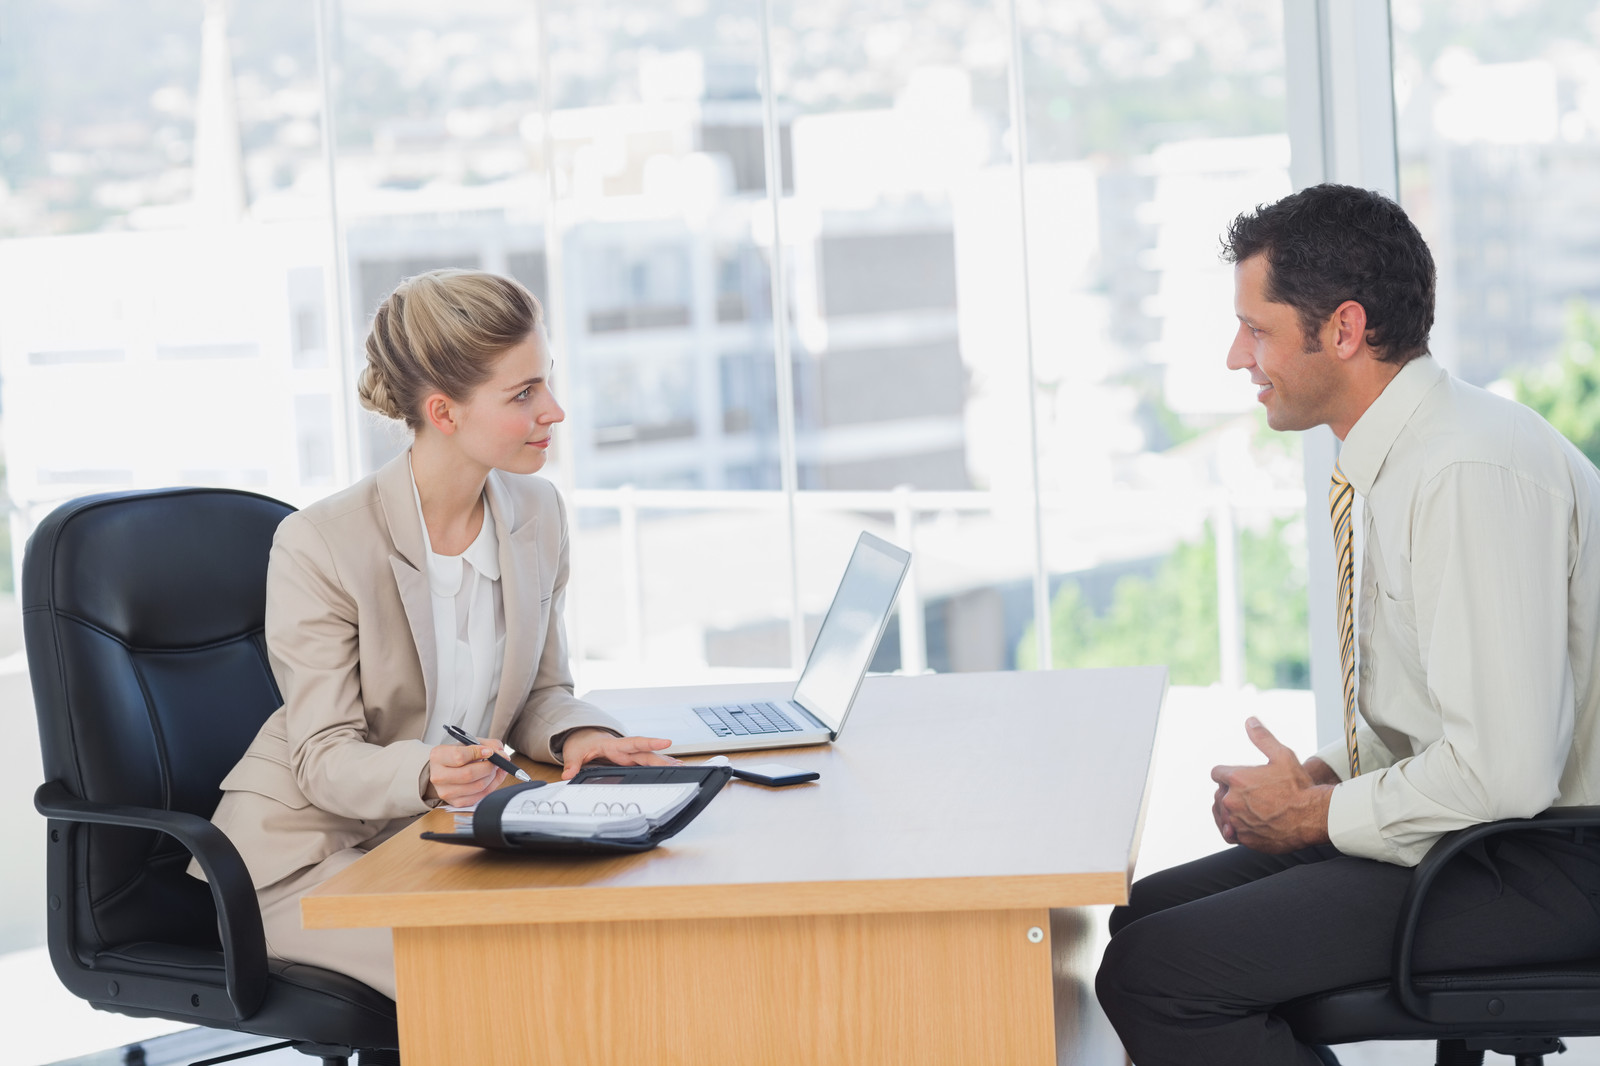 5 TIPS TO PERFORM AN IN-PERSON INTERVIEW